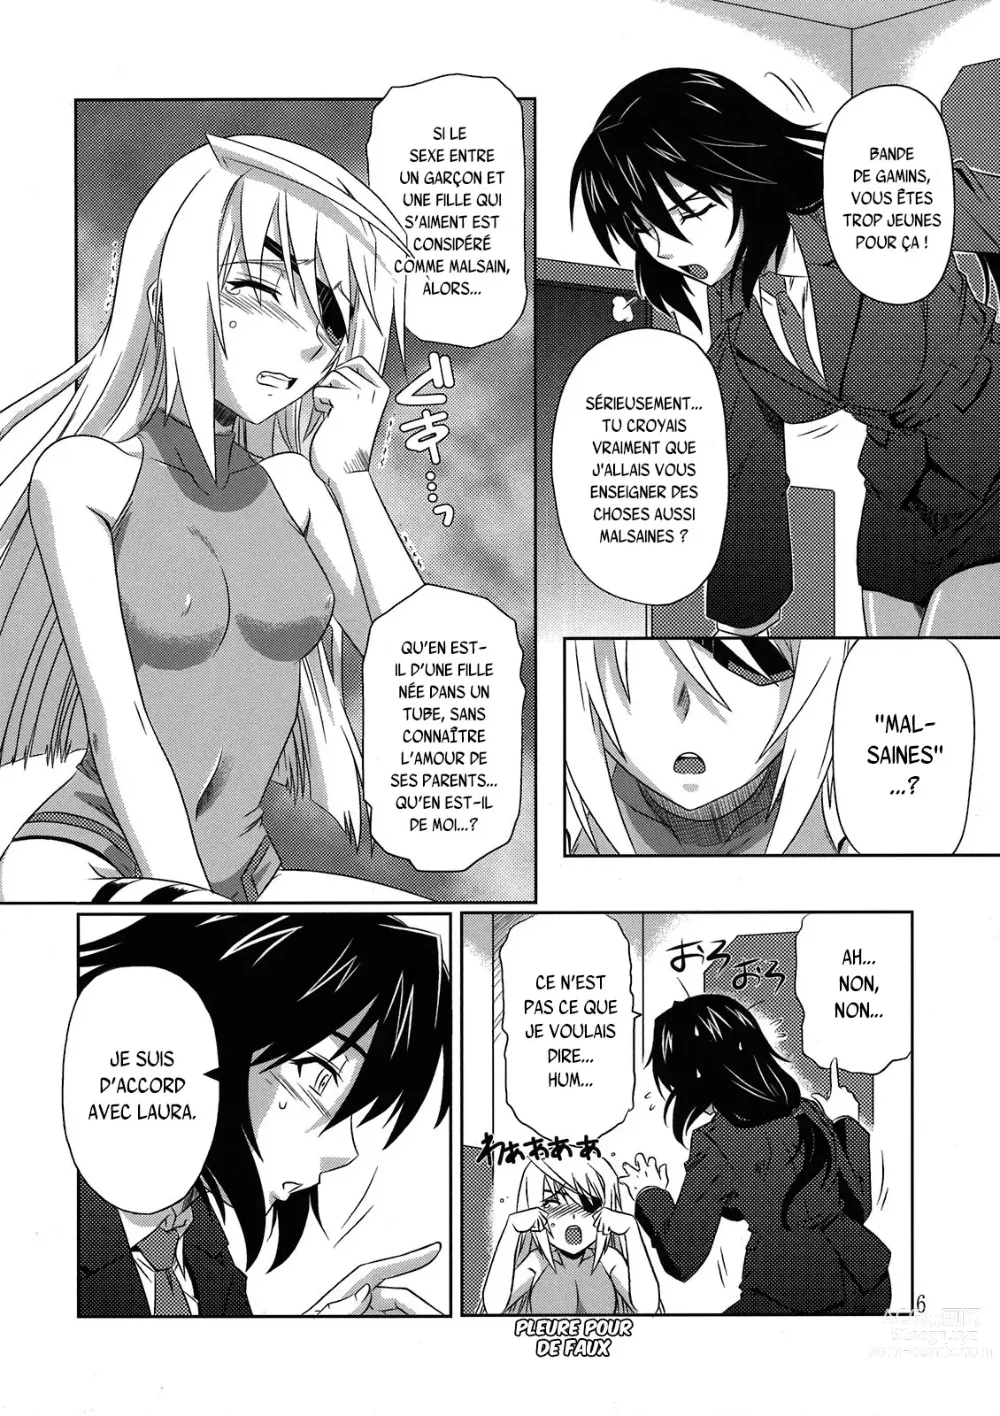 Page 6 of doujinshi is Incest Strategy (decensored)